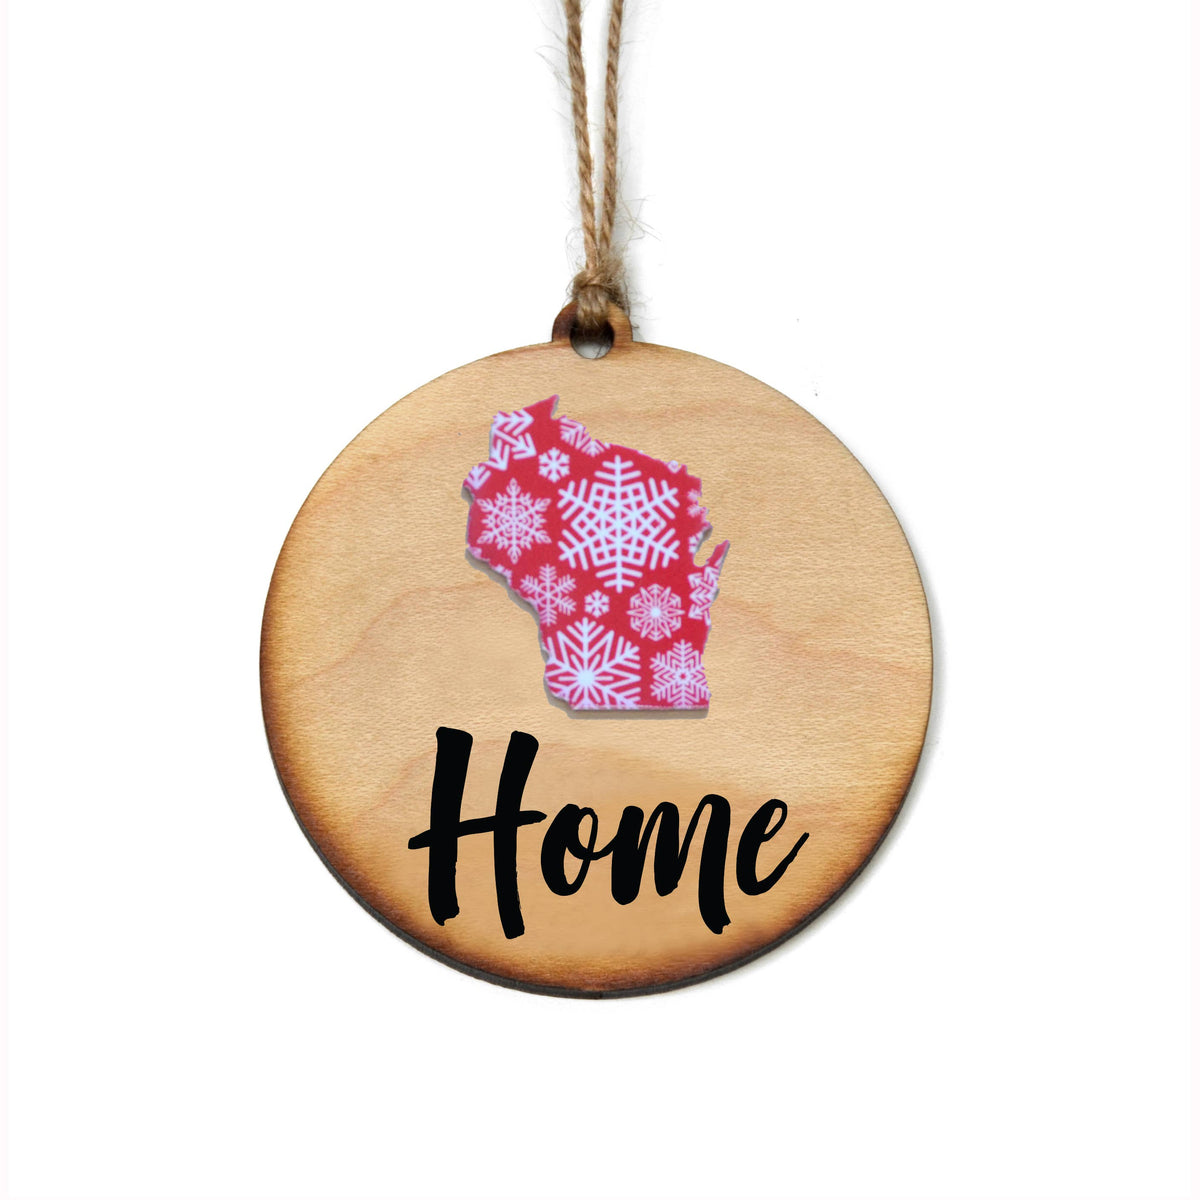 Home Christmas Ornaments In Variety Of Patterns